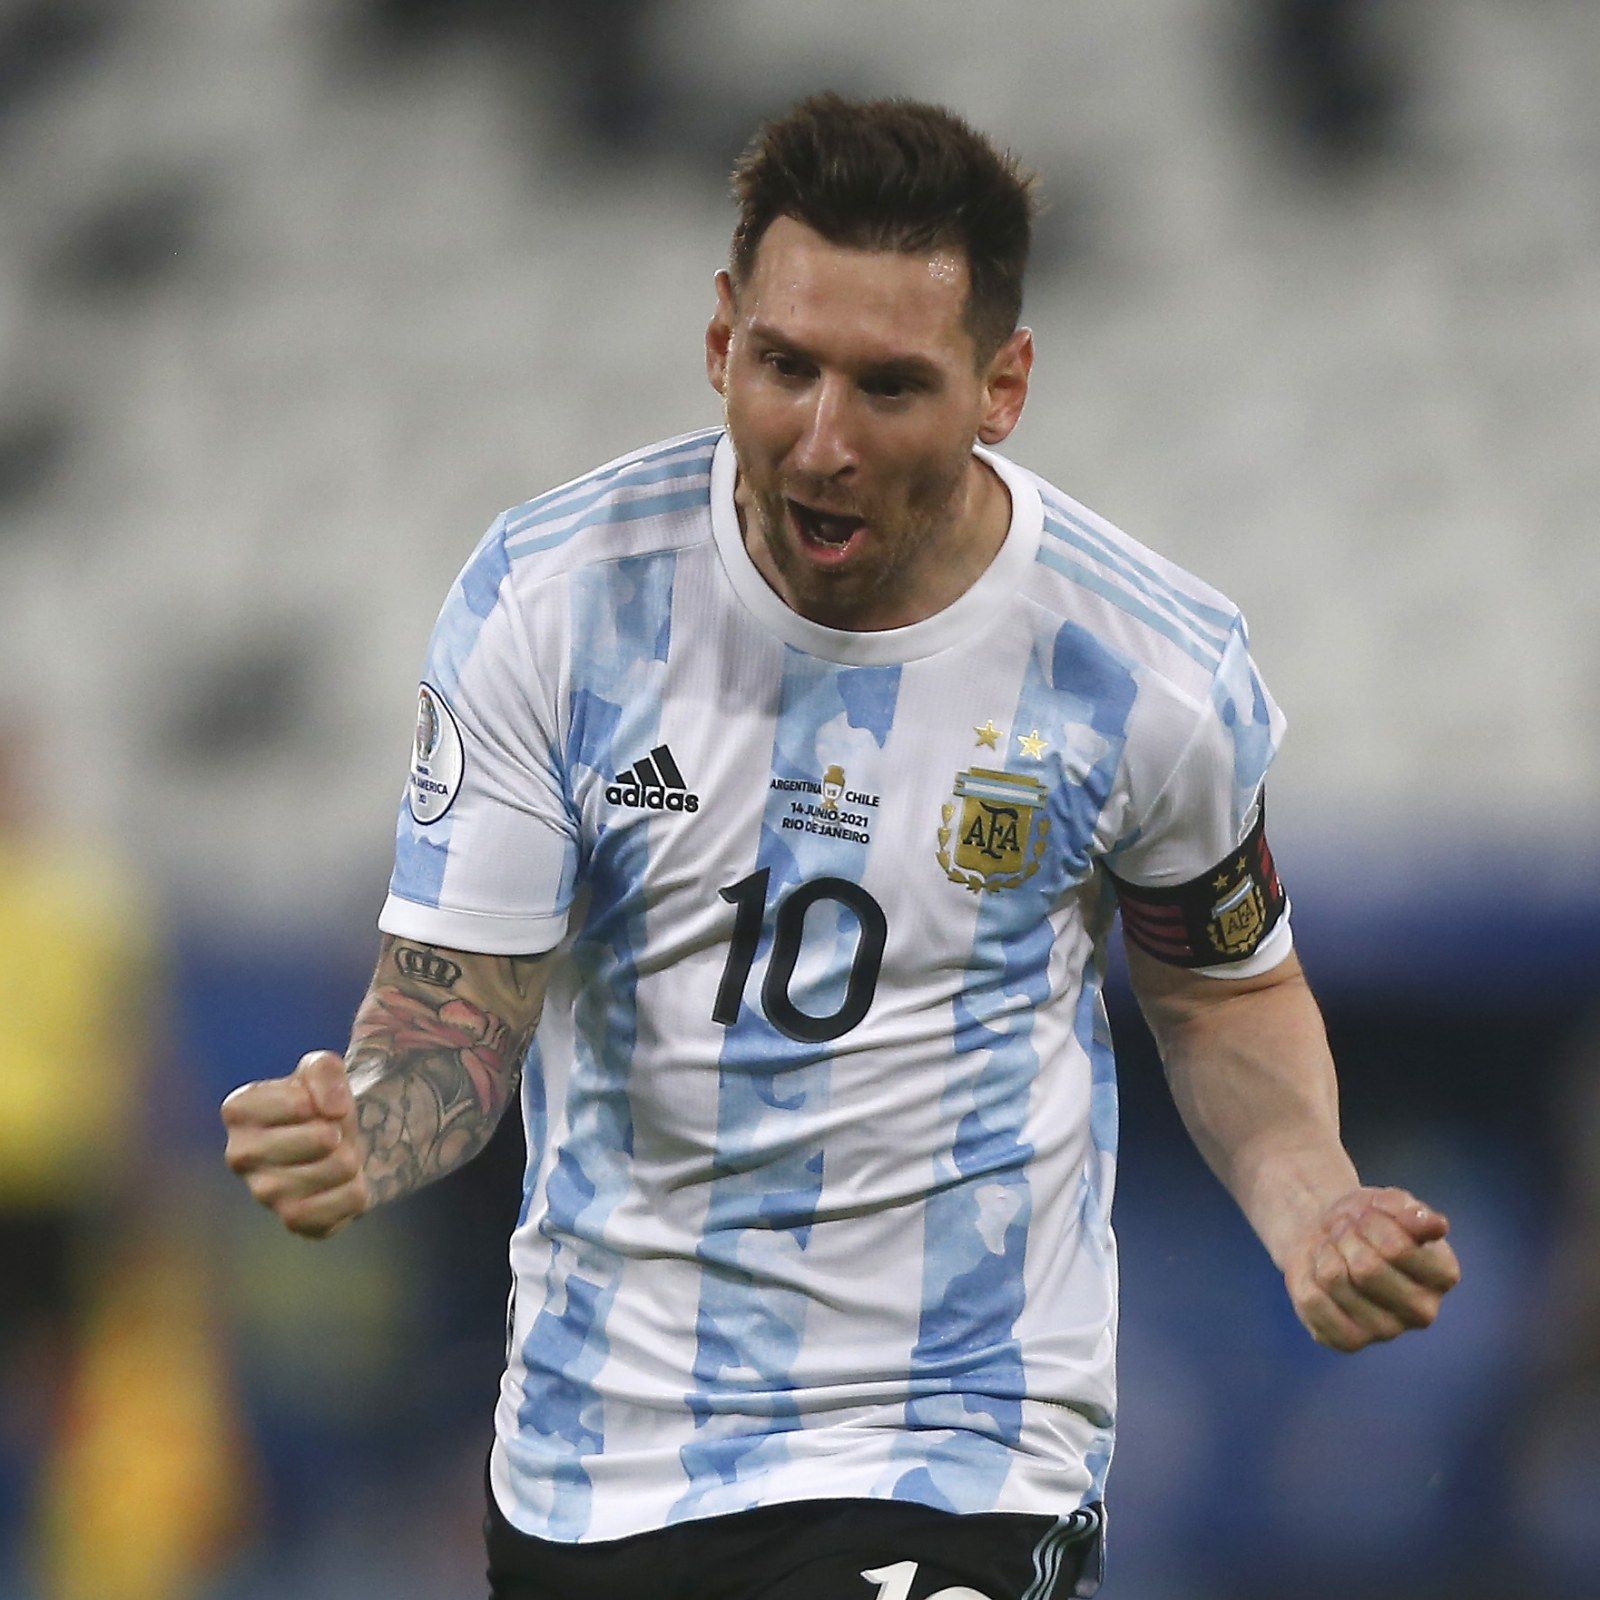 Copa America 2021: Argentina vs. Uruguay Kickoff Time, How to Watch on TV and Online